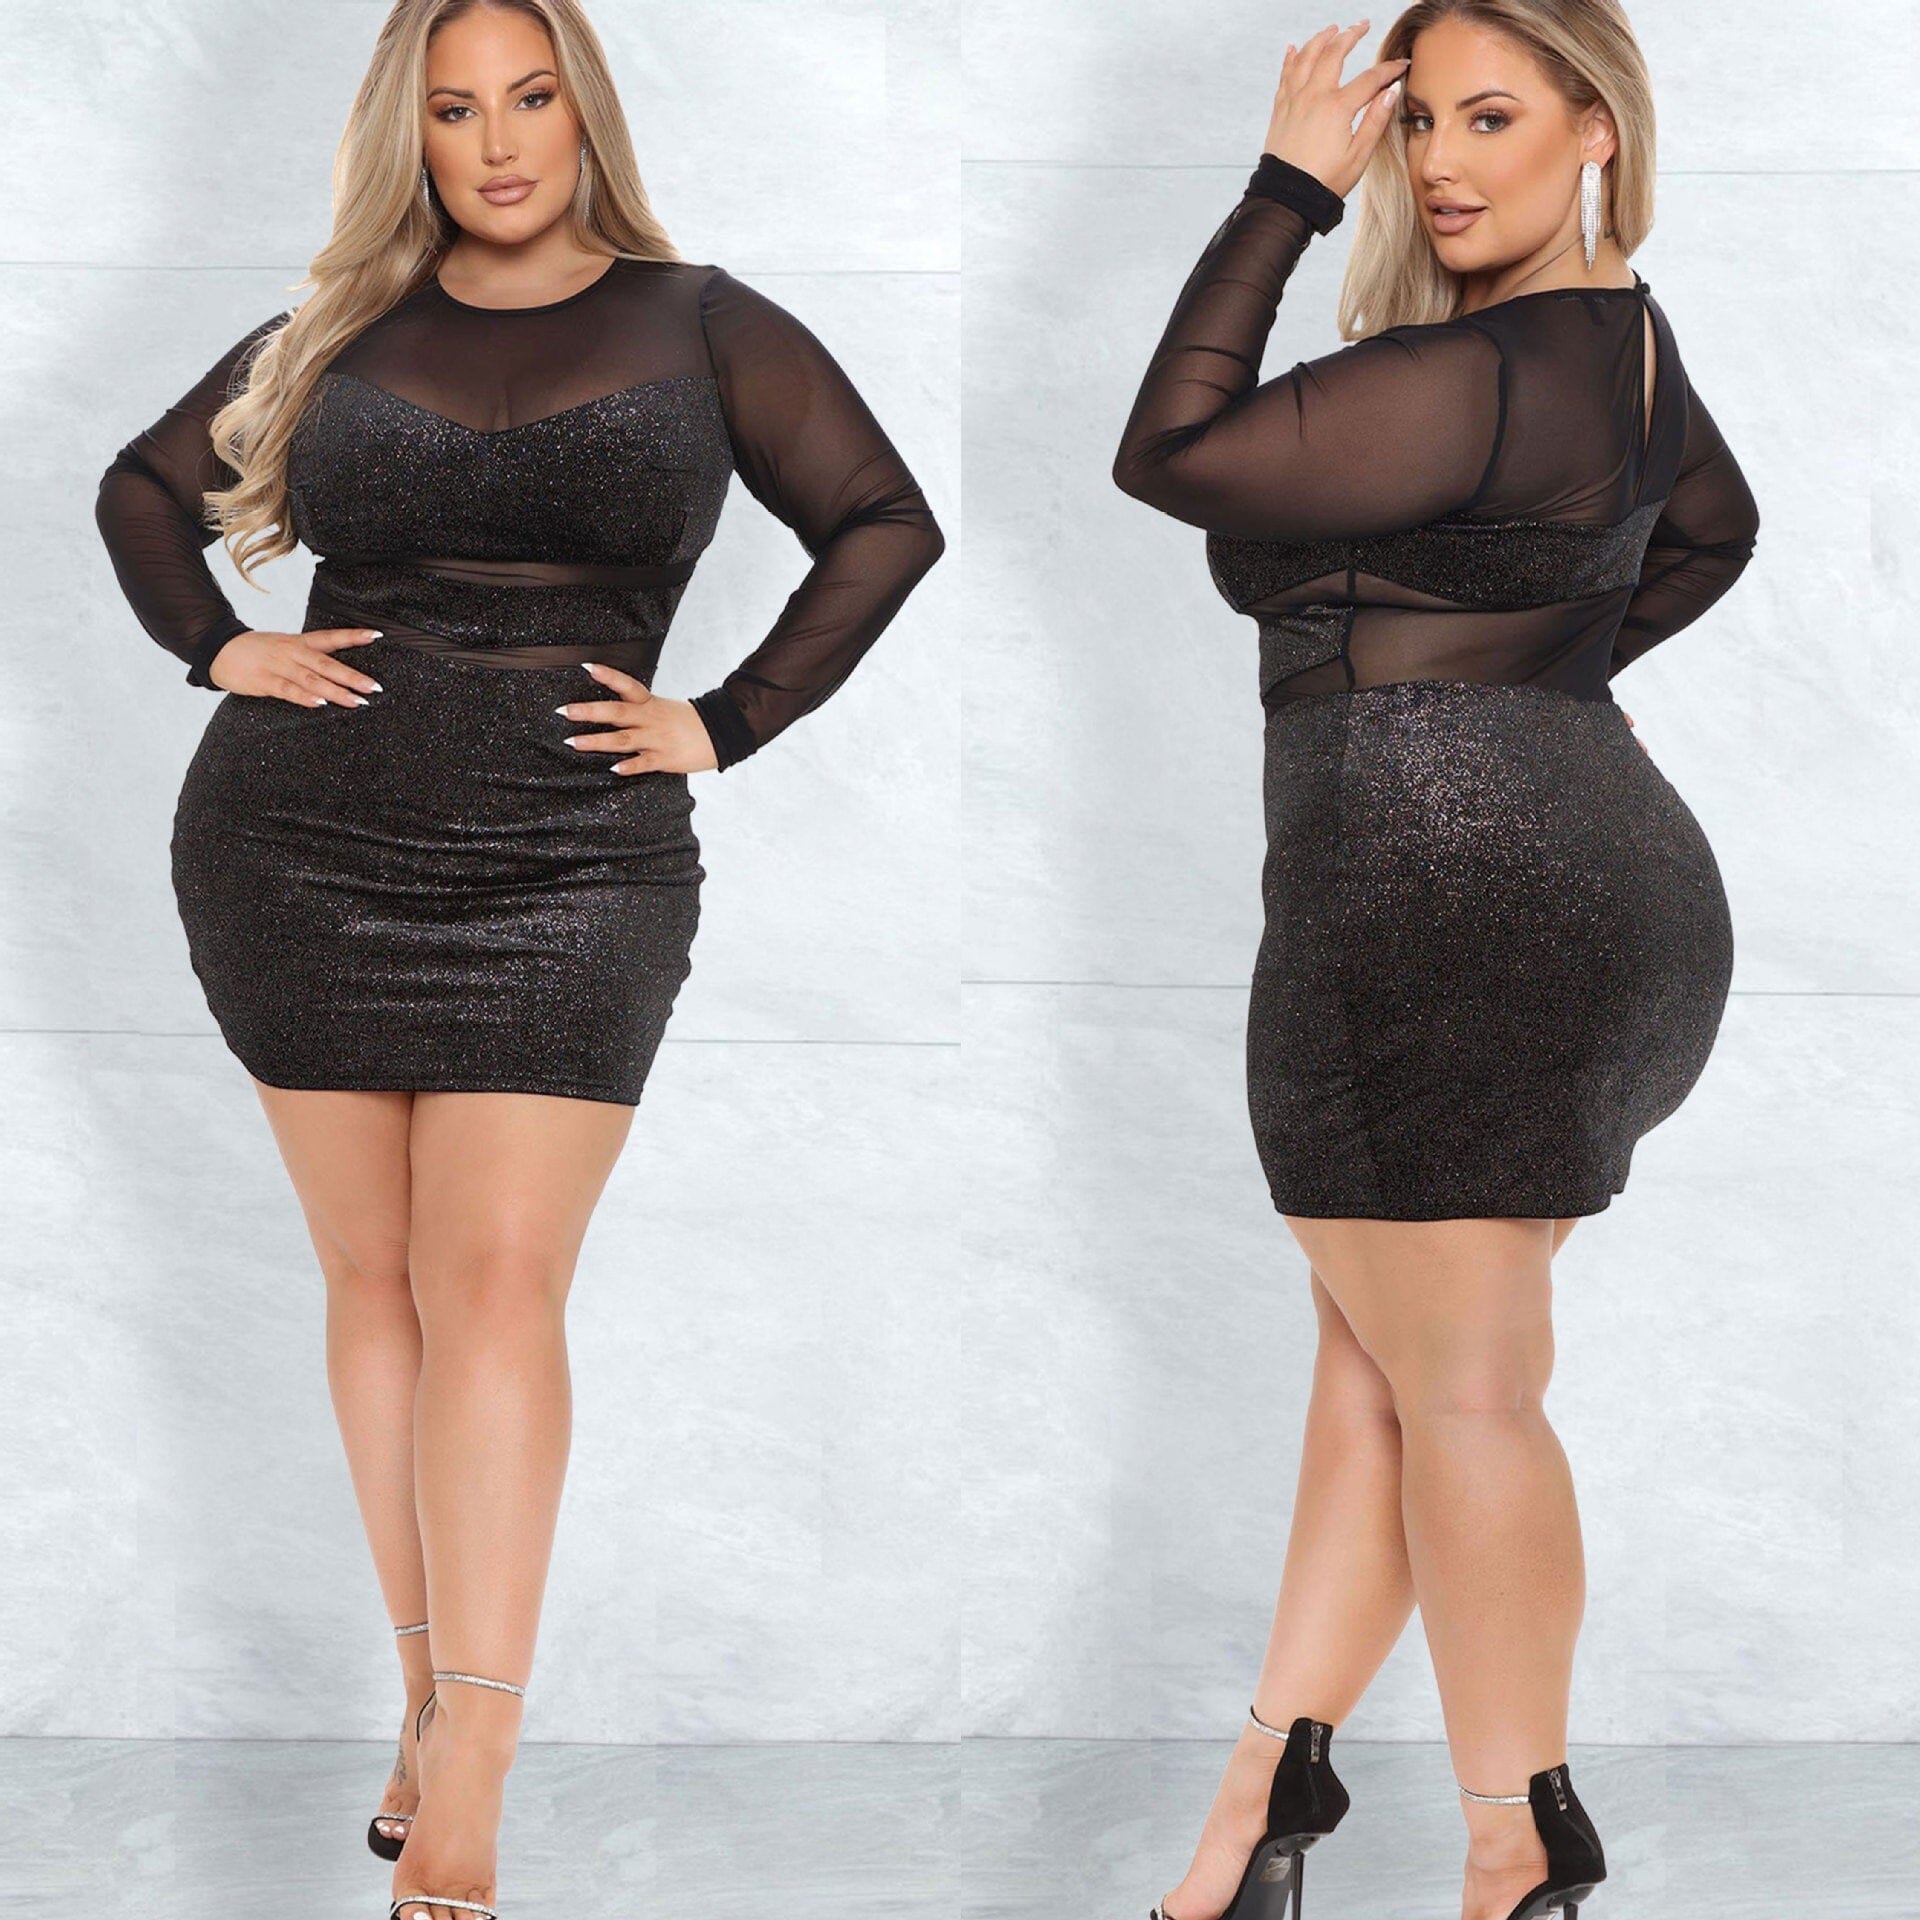 Bodycon Dresses for Women Clothes Club Outfits for Women Clubwear